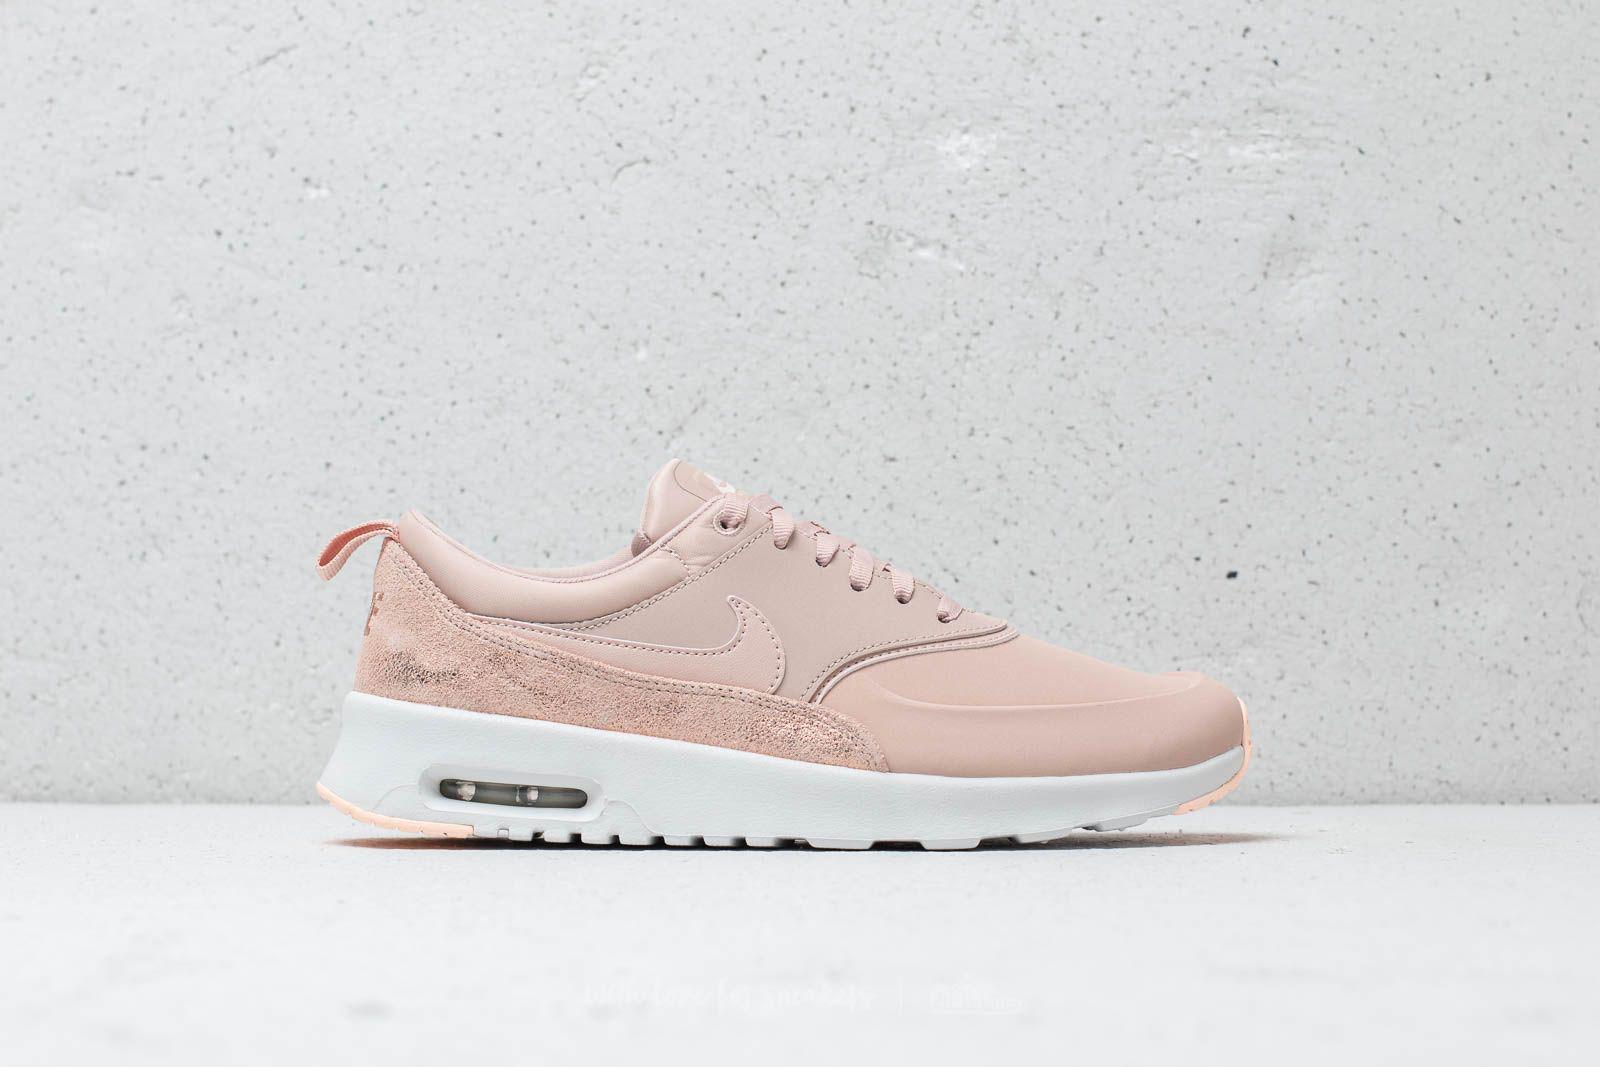 Nike Leather Wmns Air Max Thea Premium Particle Beige/ Particle Beige in  Natural - Lyst